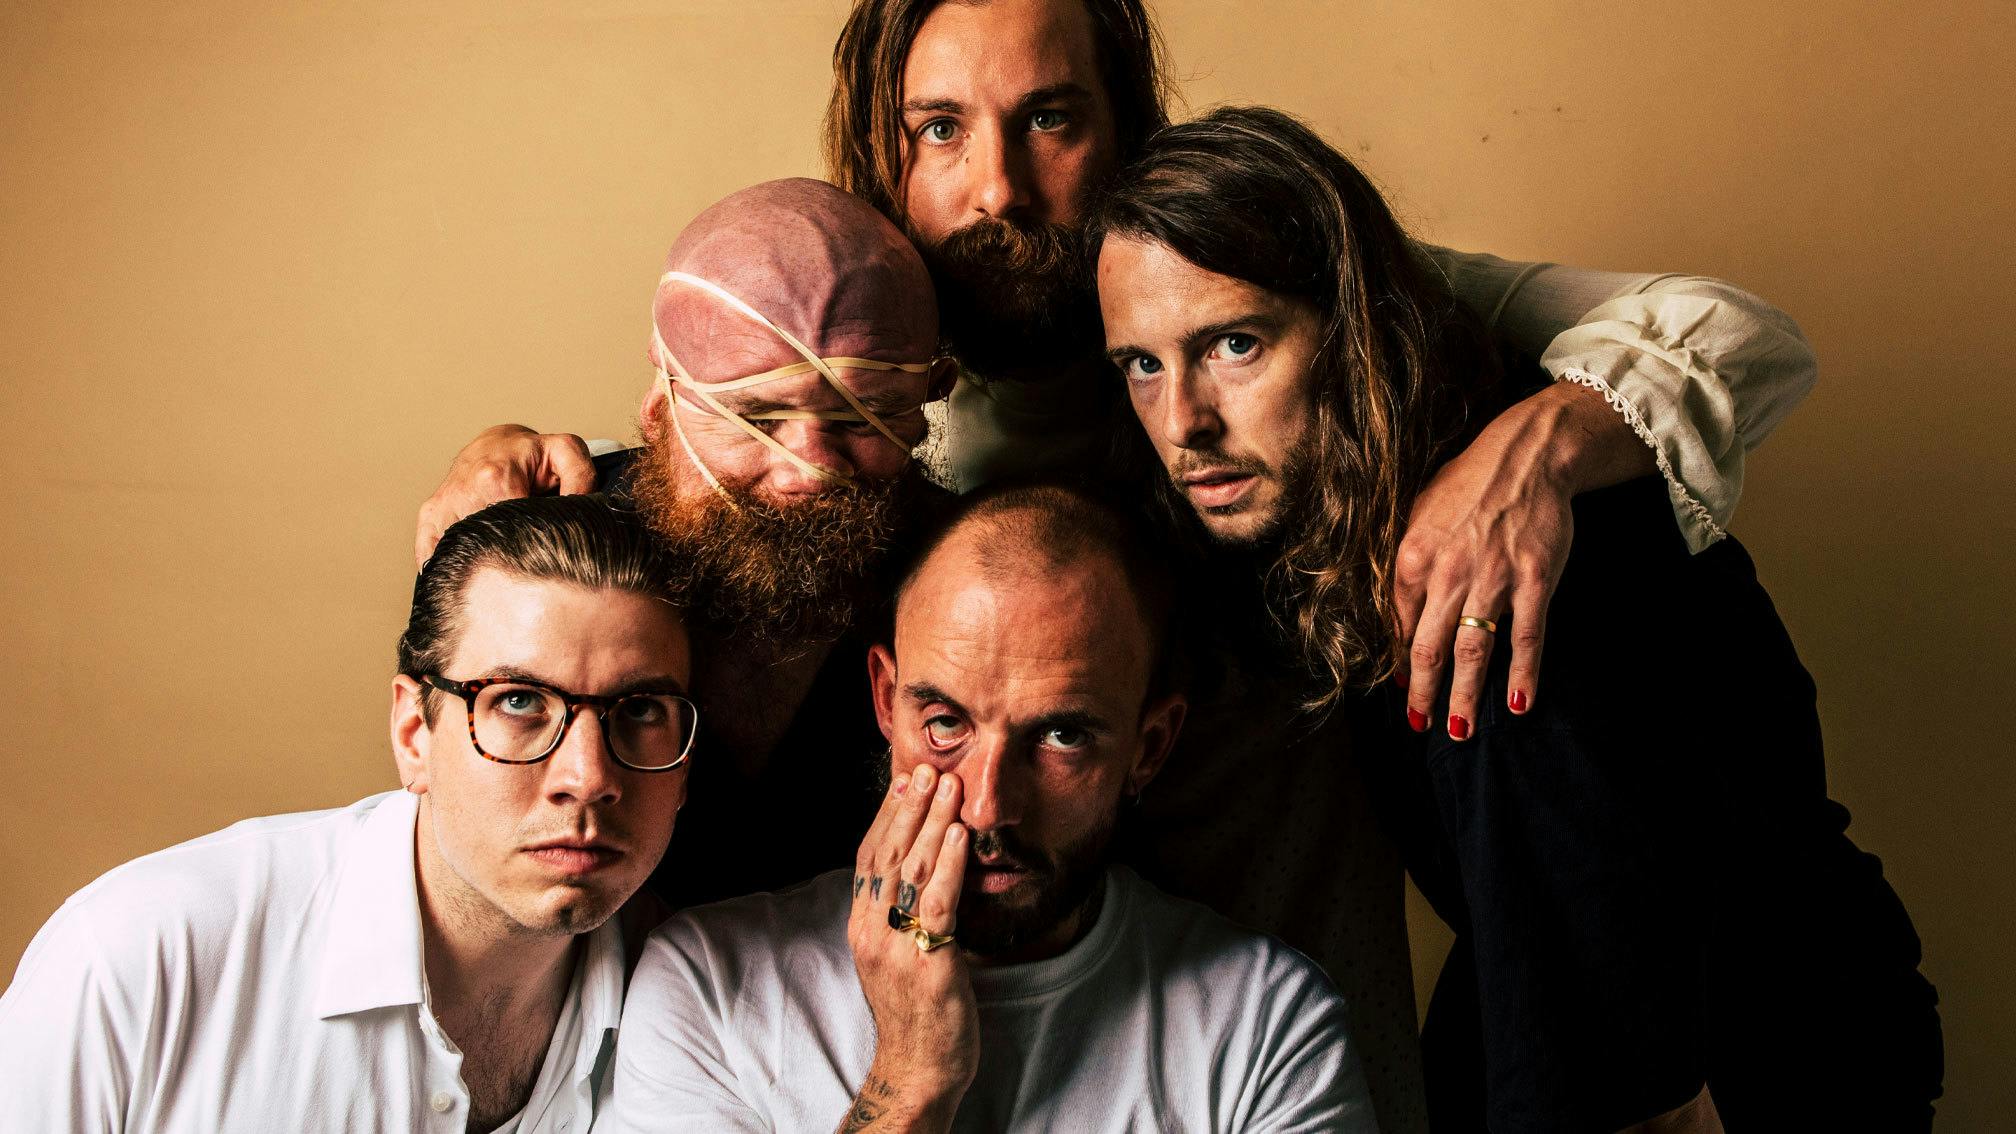 IDLES announce biggest U.S. tour to date